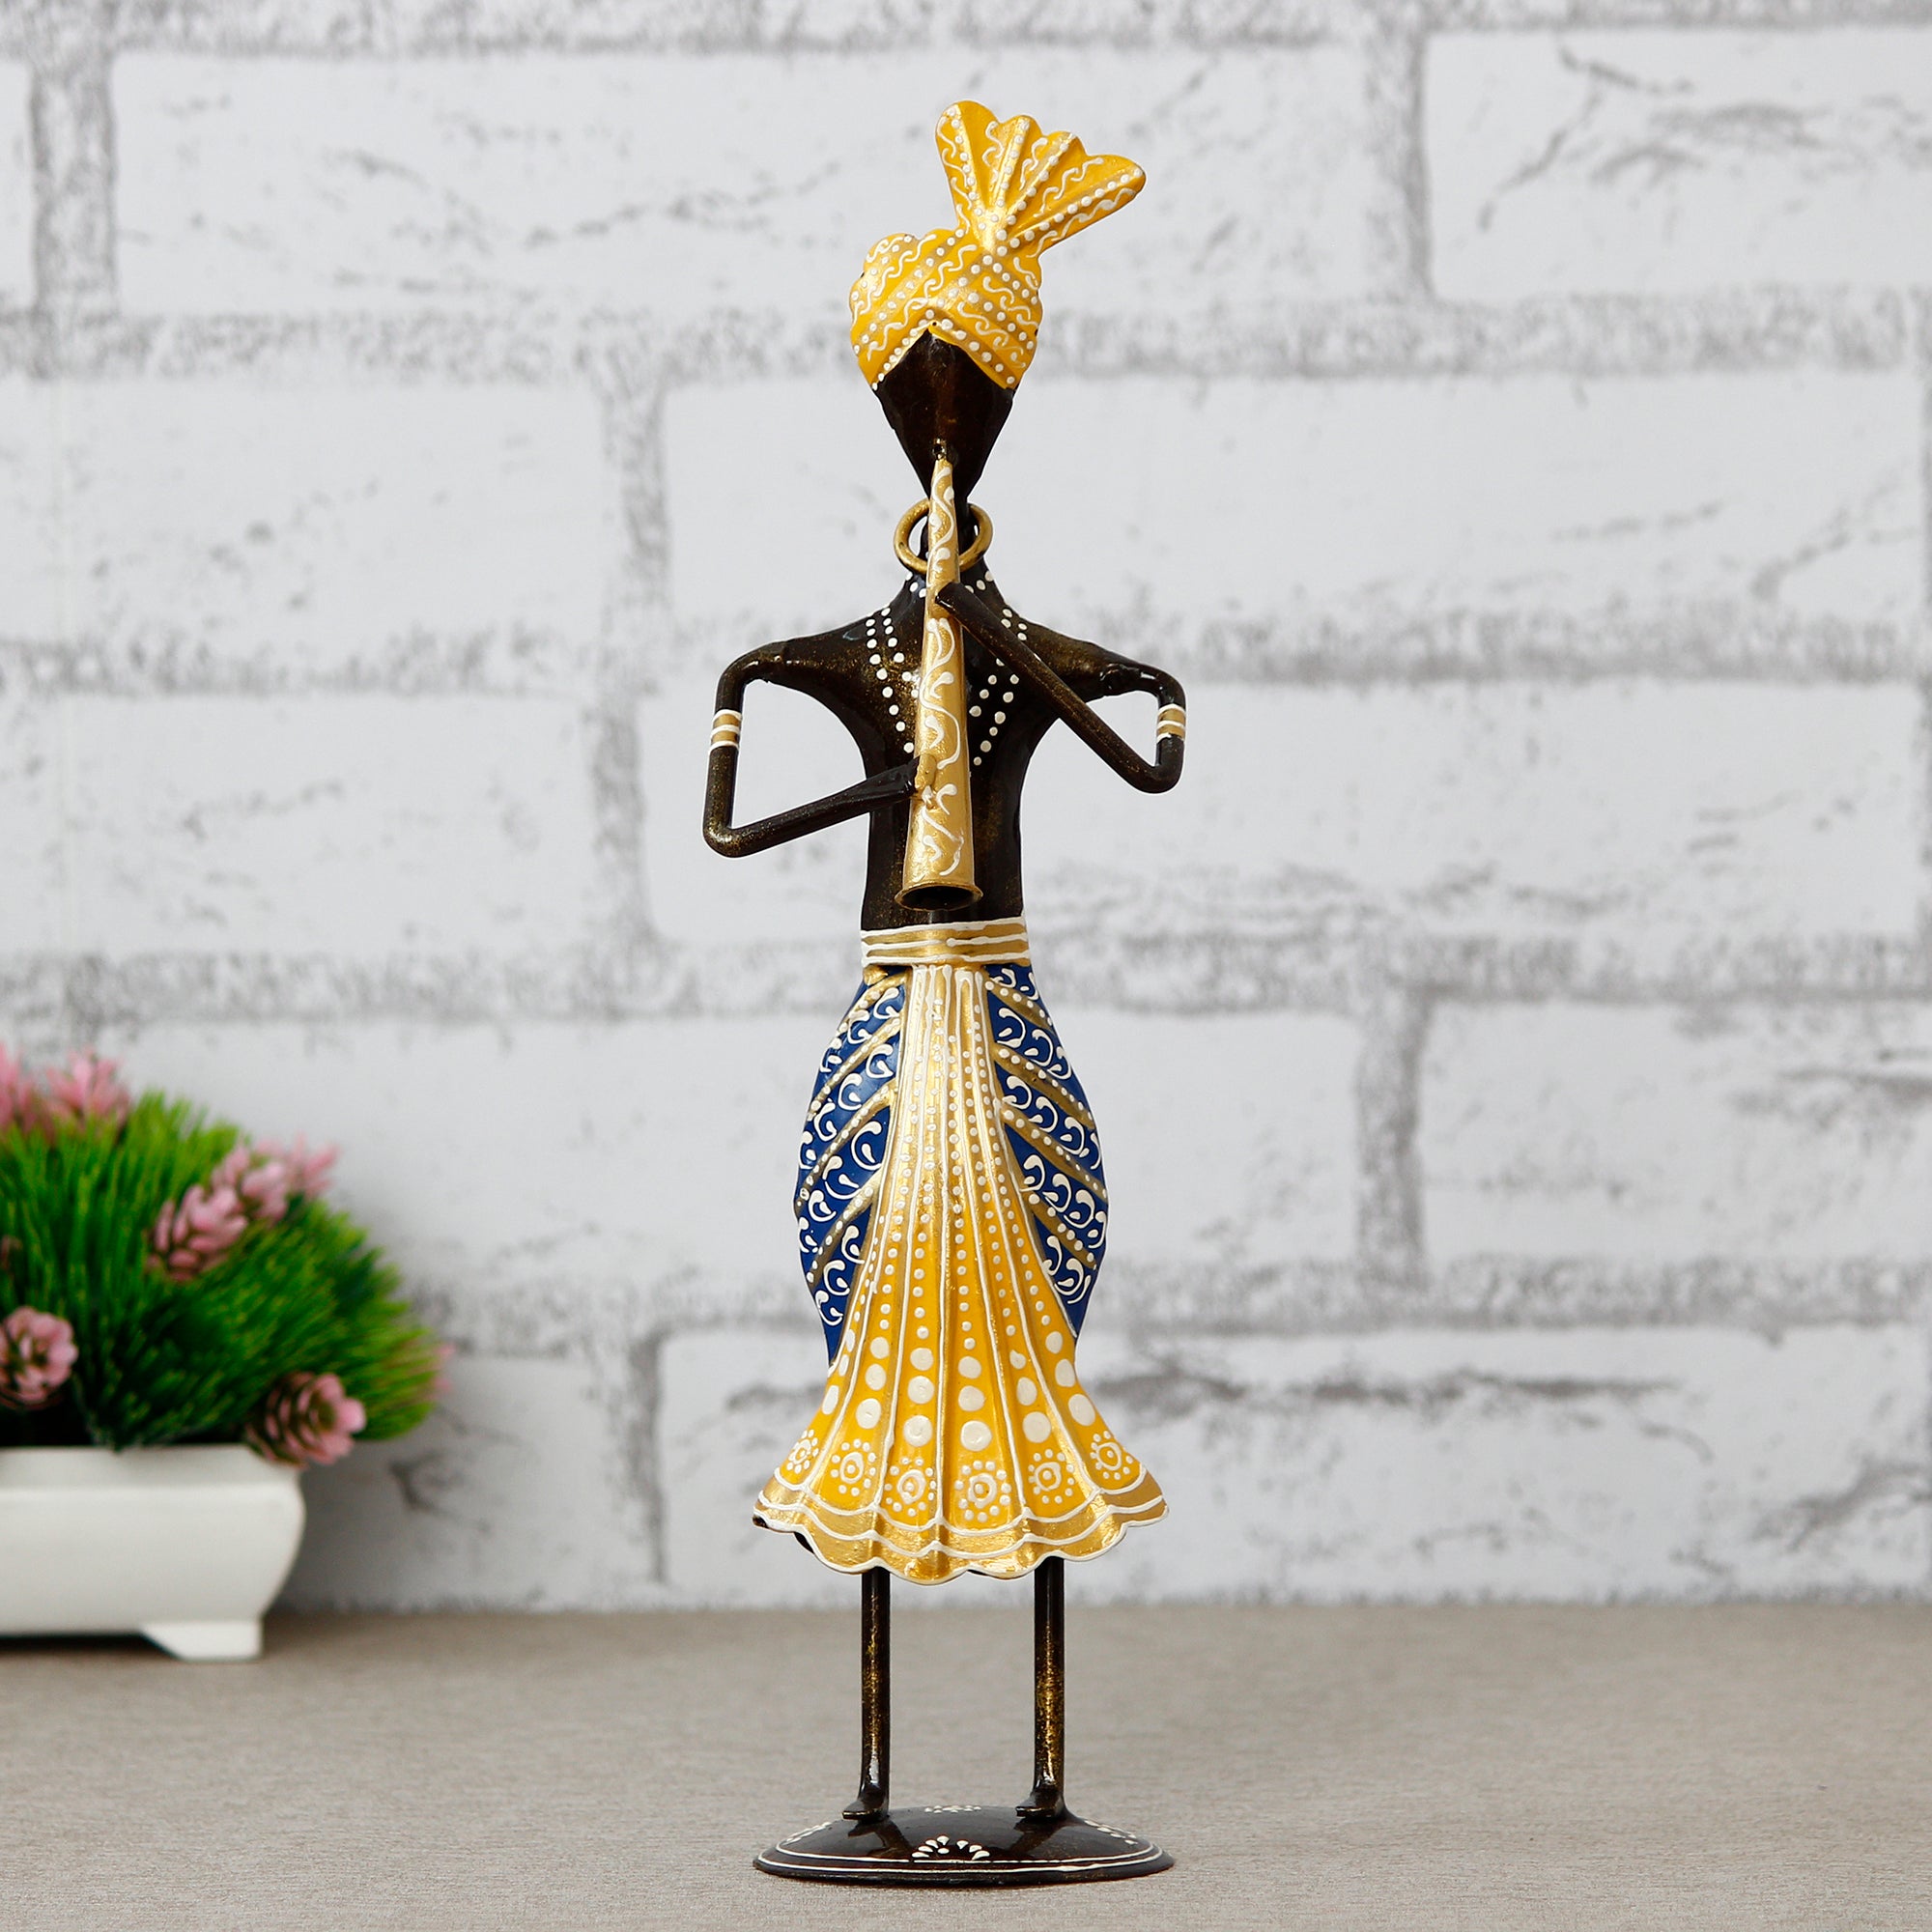 Iron Tribal Man Figurine Playing Trumpet Musical Instrument Decorative Showpiece (Black, Yellow and Blue)